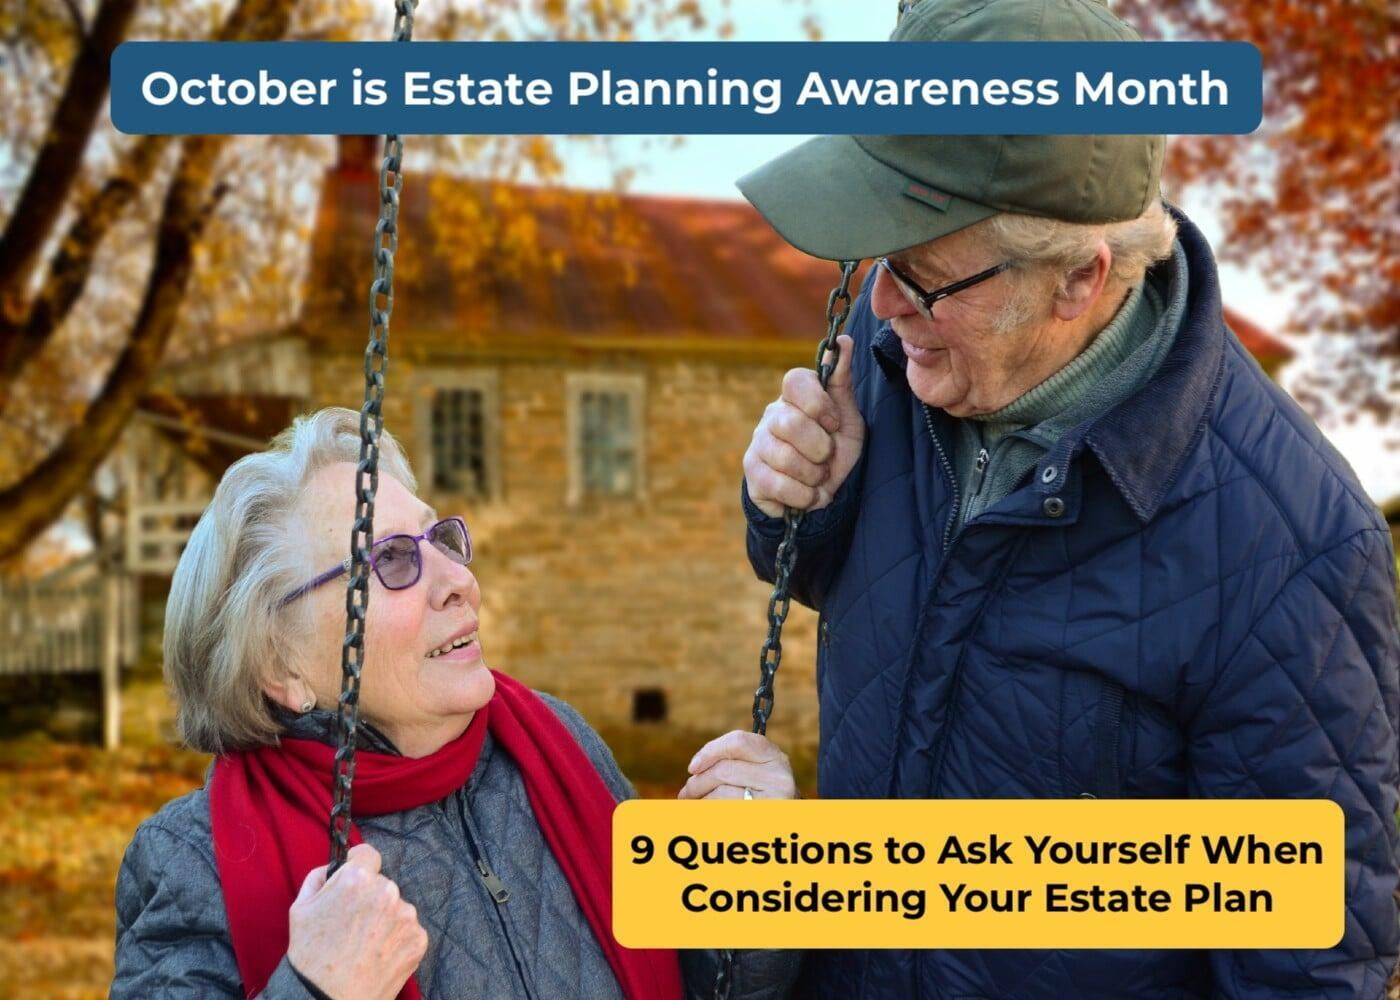 9 Questions to Ask Yourself During the Estate Planning Process